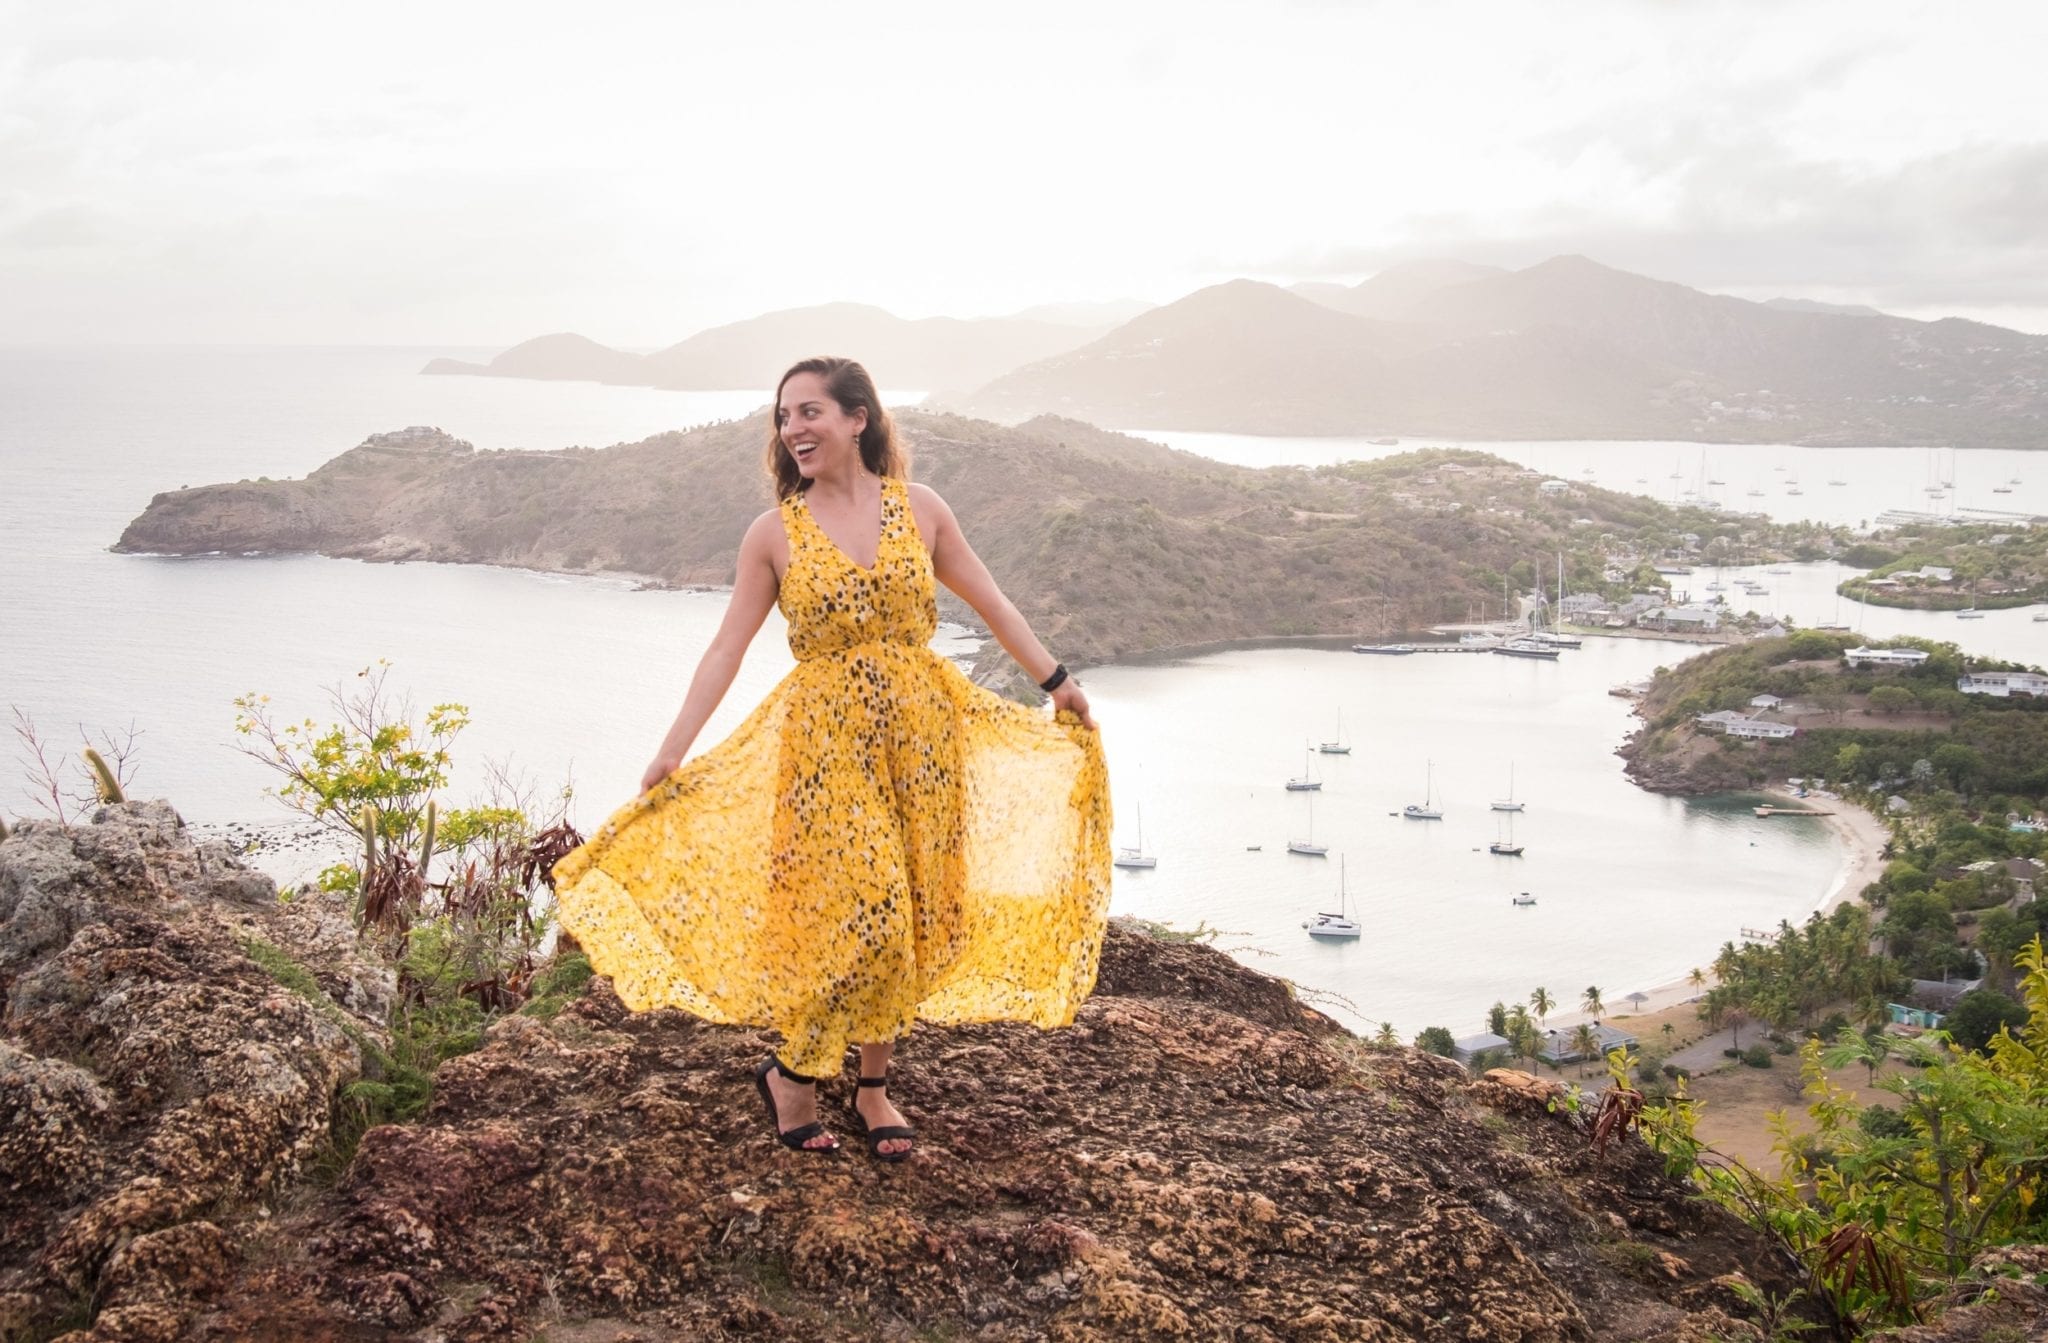 Kate wearing a long yellow and black-spotted gauzy gown over an overlook in Shirley Heights, Antigua. Kate is holding the gauzy outer layer open and smiling. In the background is a view over the White Sea down below, and mountains in the distance.